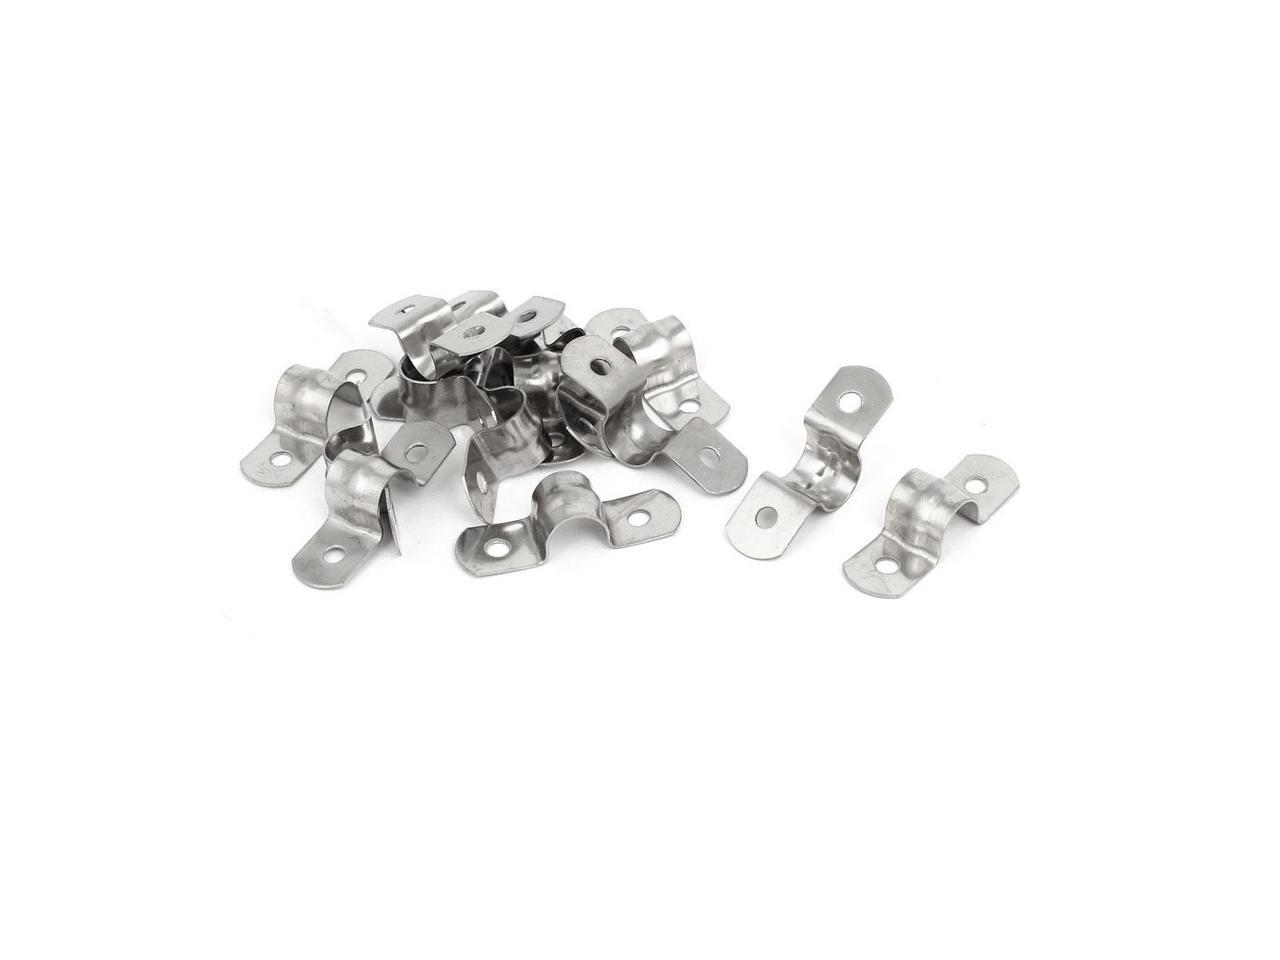 Aexit M10 304 Clamps Stainless Steel Two Hole Pipe Straps Tension Tube Clip C-Clamps Clamp 15pcs 